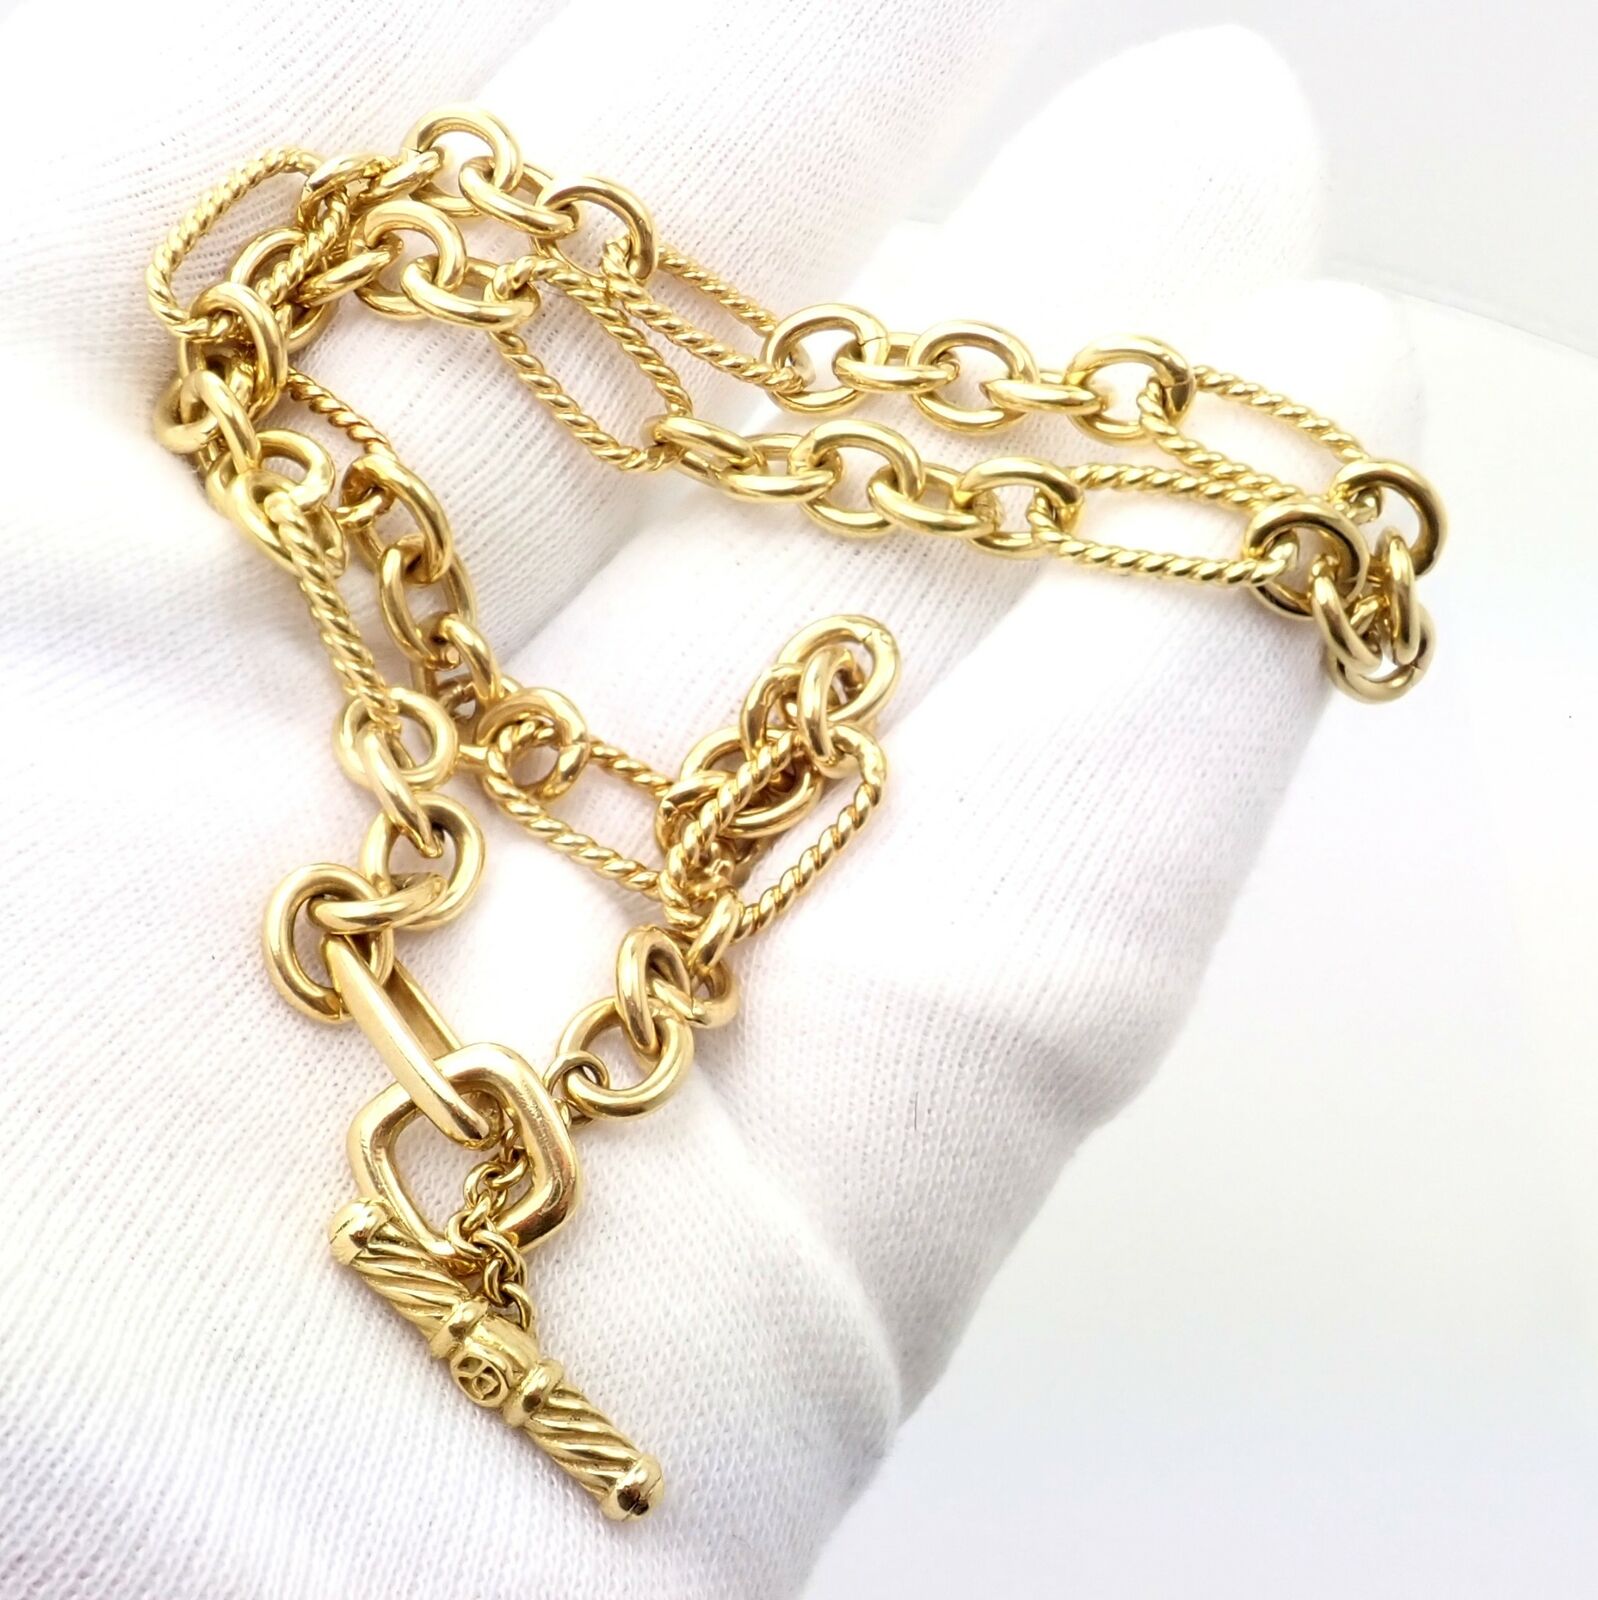 David Yurman Jewelry & Watches:Vintage & Antique Jewelry:Necklaces & Pendants David Yurman DY 18K Yellow Gold 8mm Figaro Cable Link Chain Toggle Necklace